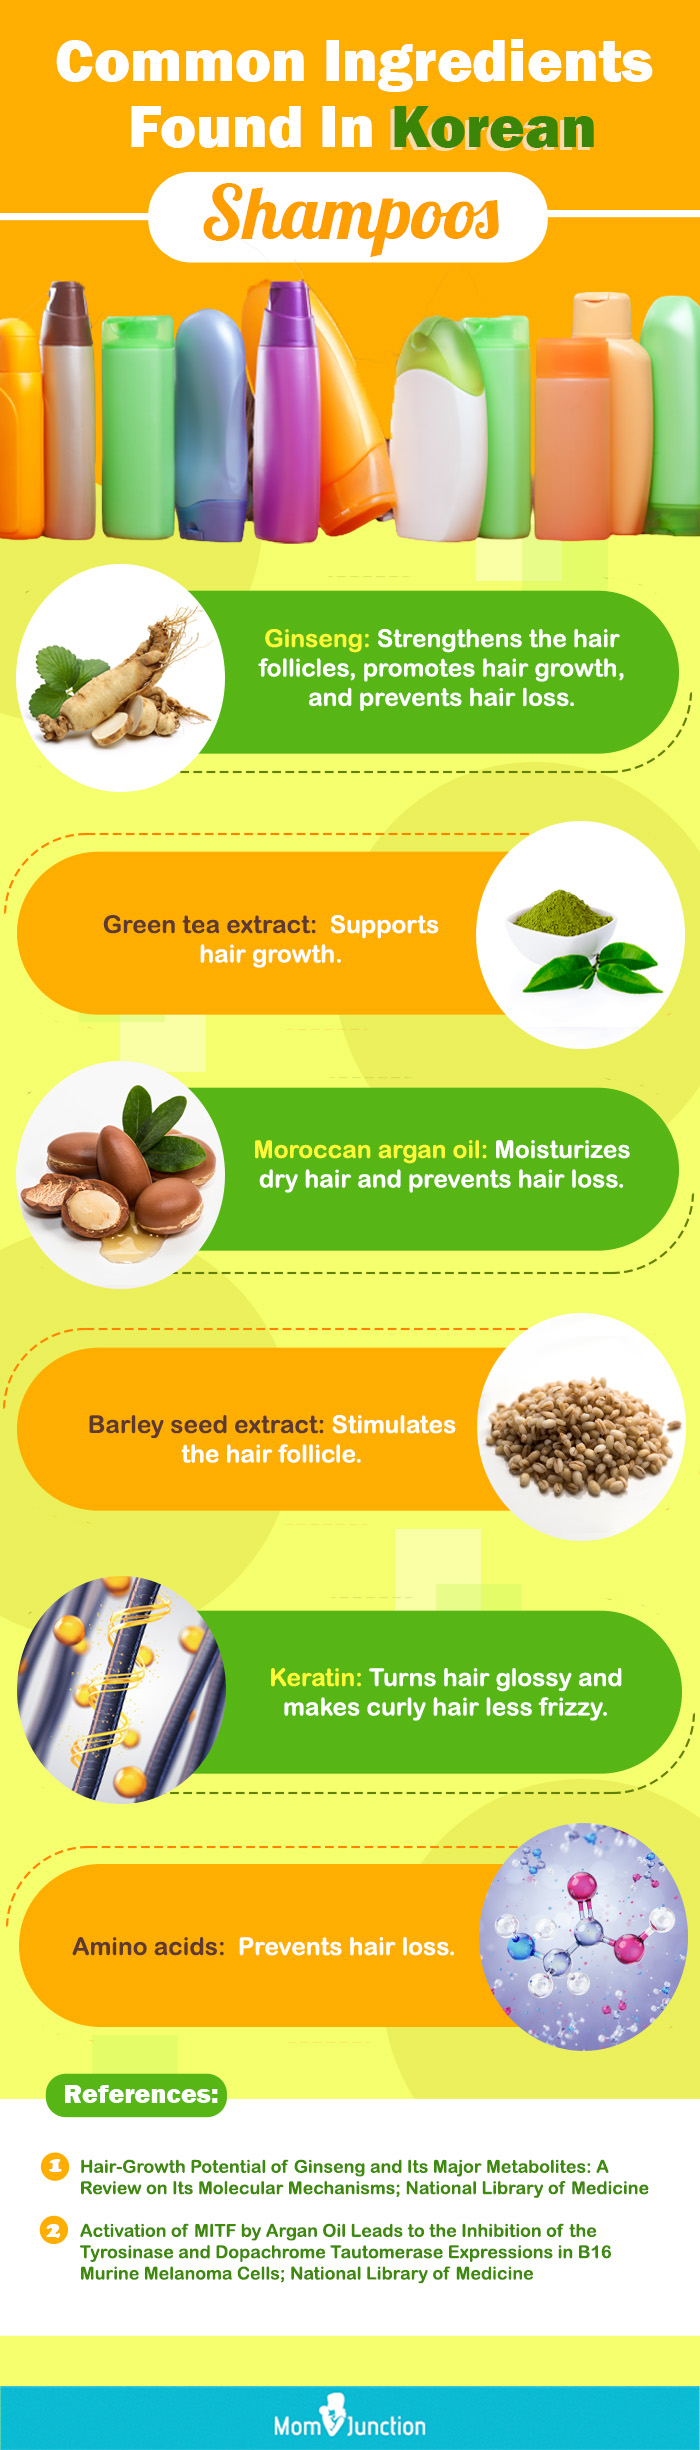 Common Ingredients Found In Korean Shampoos (infographic)